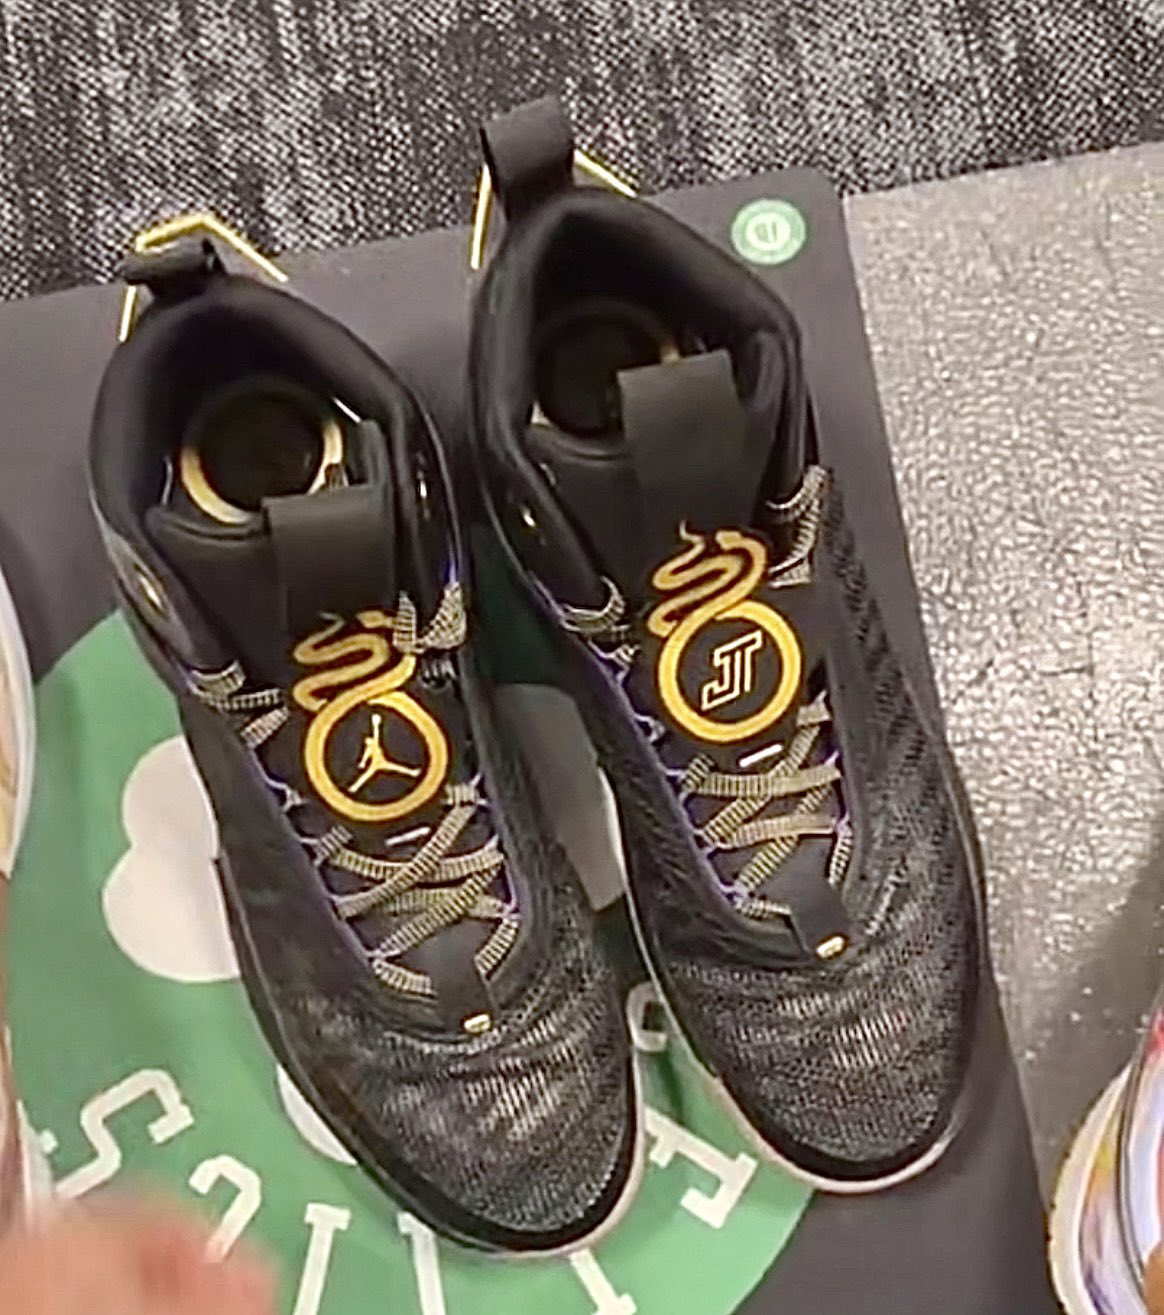 Nick DePaula on X: Jayson Tatum's newest Air Jordan 36 PE celebrates one  of his son Deuce's favorite books — “Brown Bear, Brown Bear, What Do You  See?” — which they read